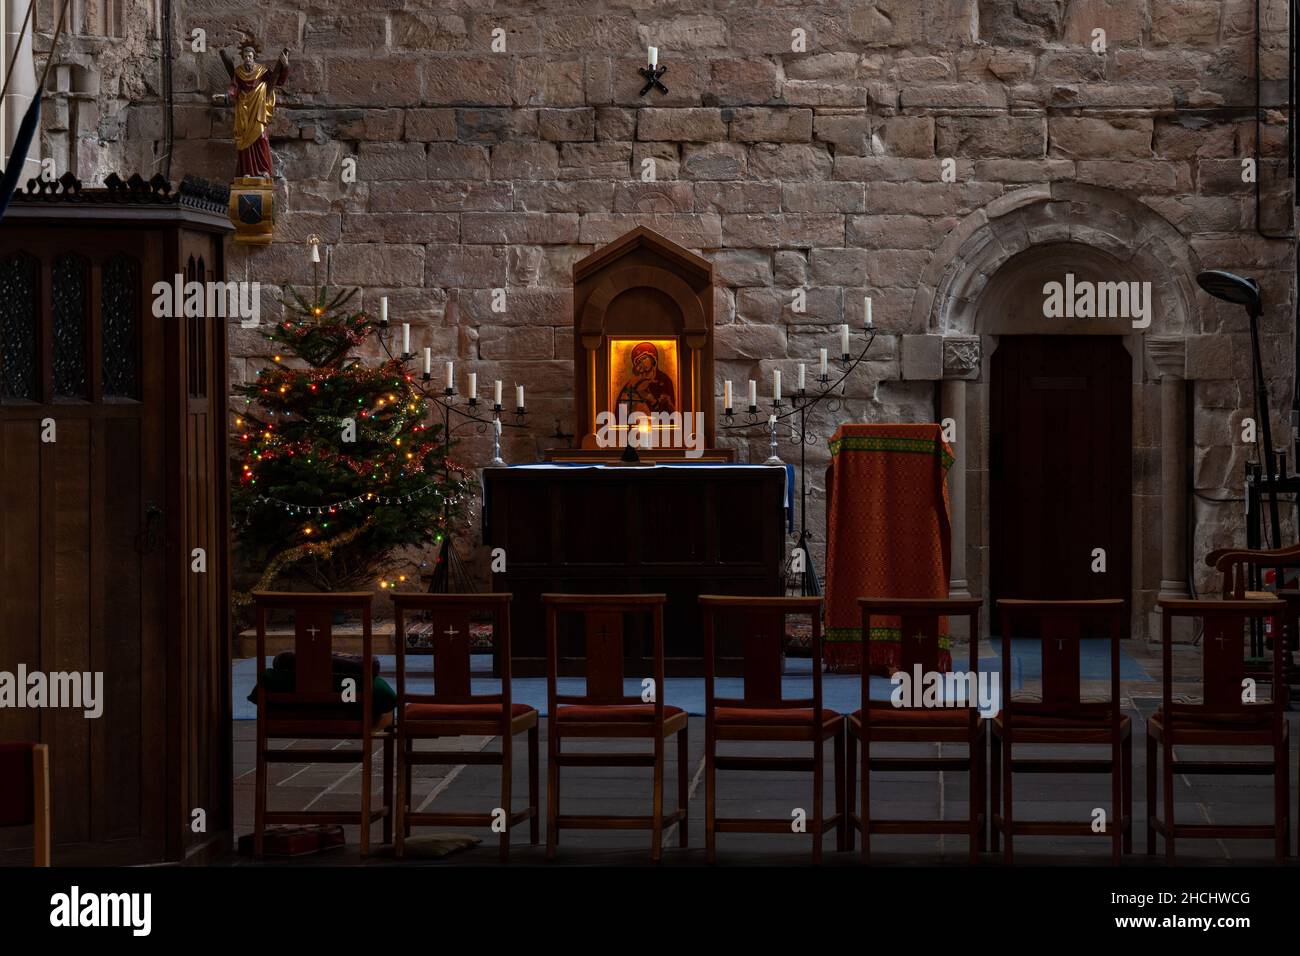 PLUSCARDEN, MORAY, SCOTLAND - 29 DECEMBER 2021: This is an interior view within the public area of the Abbey at Pluscarden, Moray, Scotland on 29 Dece Stock Photo